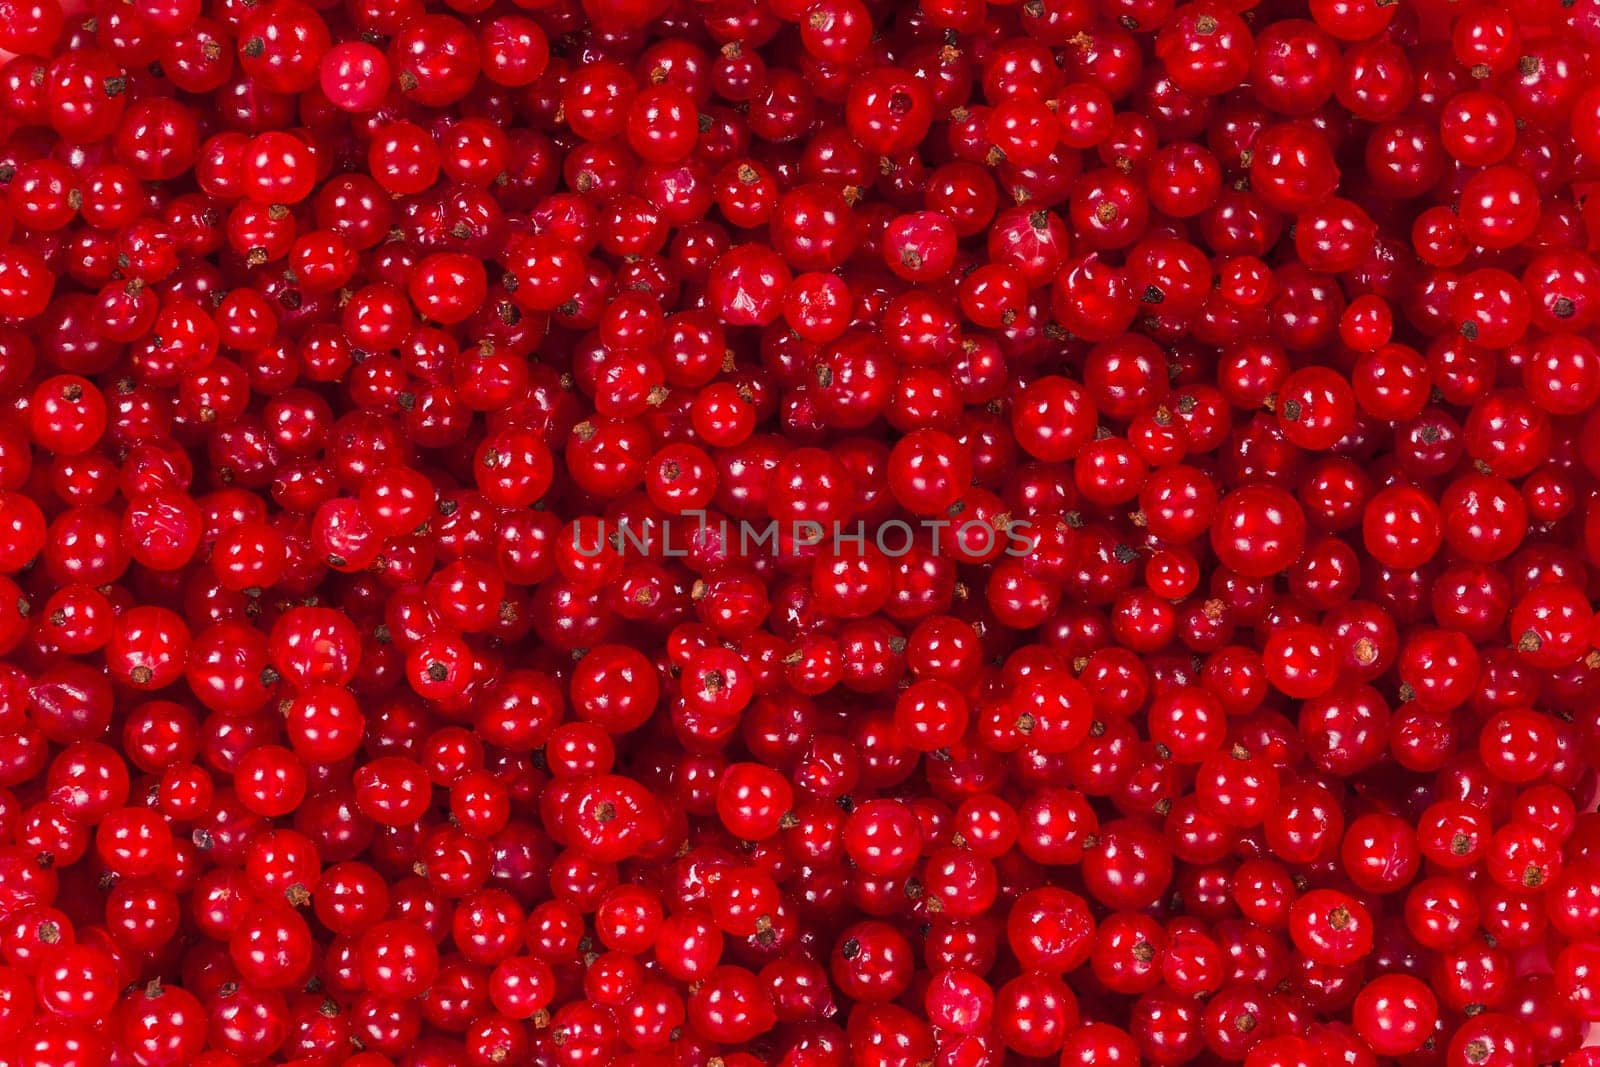 Ripe red currant berries for the whole frame close-up